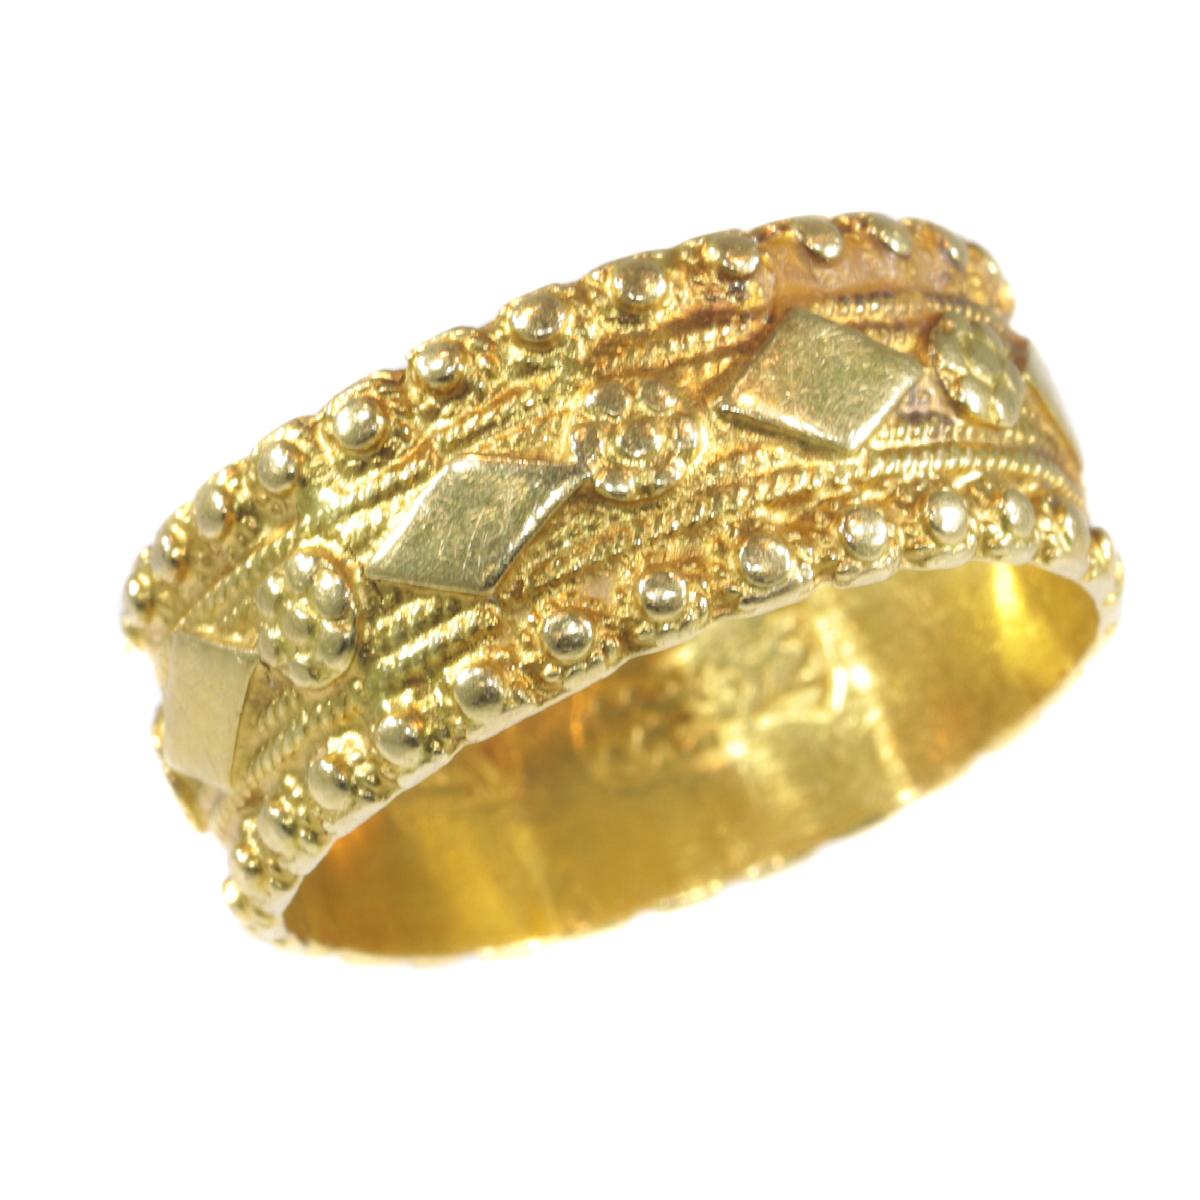 Late 18th Century Rococo Dutch Gold Ring with Amsterdam Hallmarks, 1780s For Sale 1